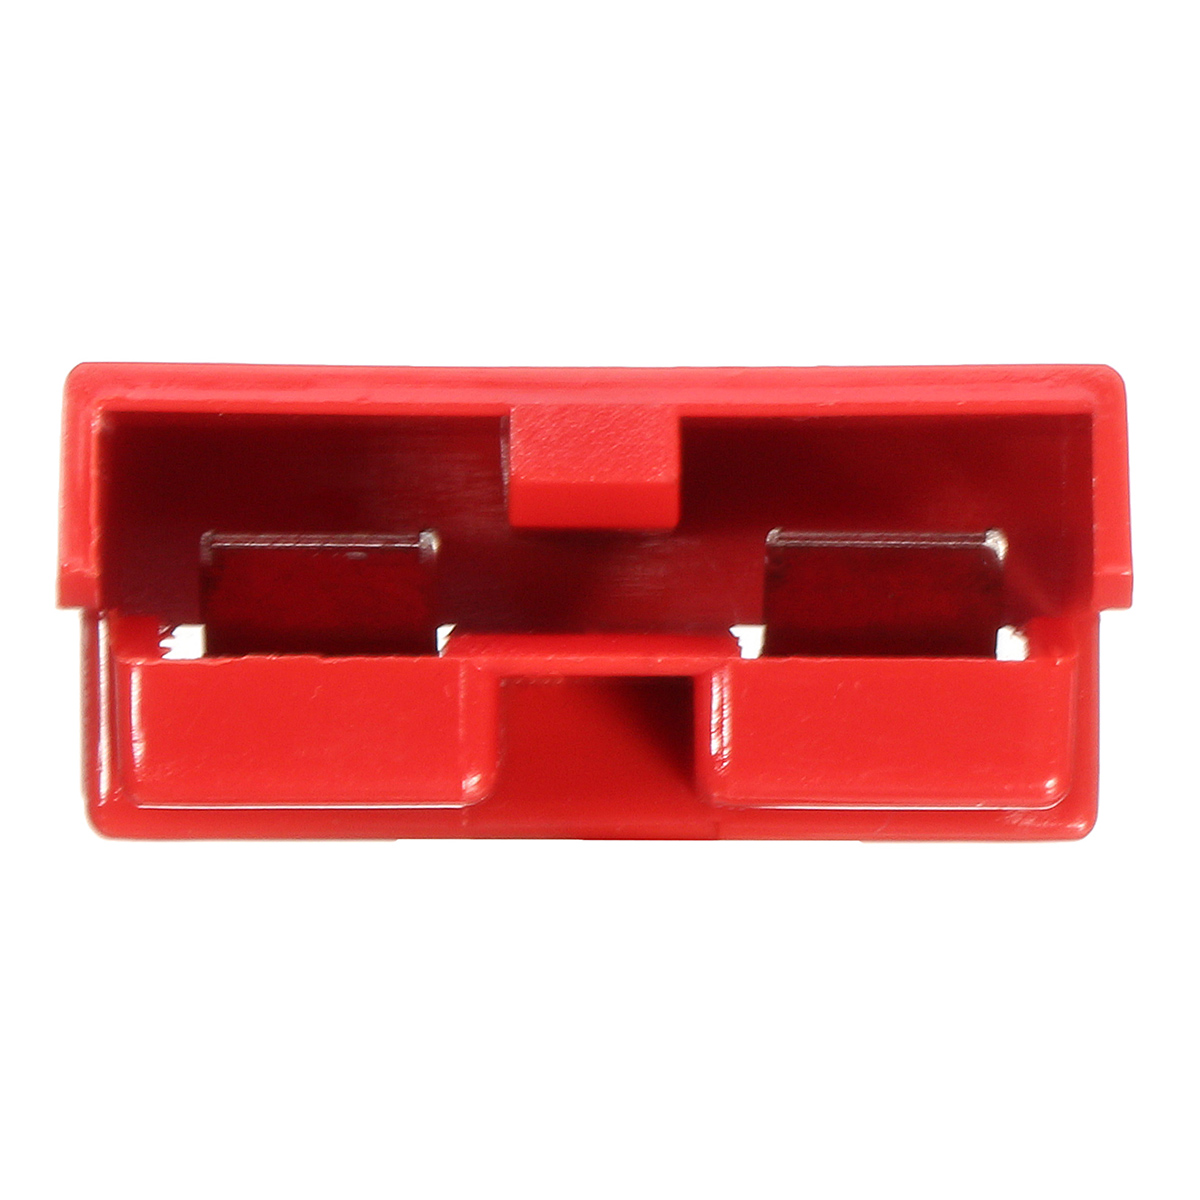 Excellway-50A-8AWG-Battery-Quick-Connector-Plug-Connect-Terminal-Disconnect-Winch-Trailer-Red-1170740-4